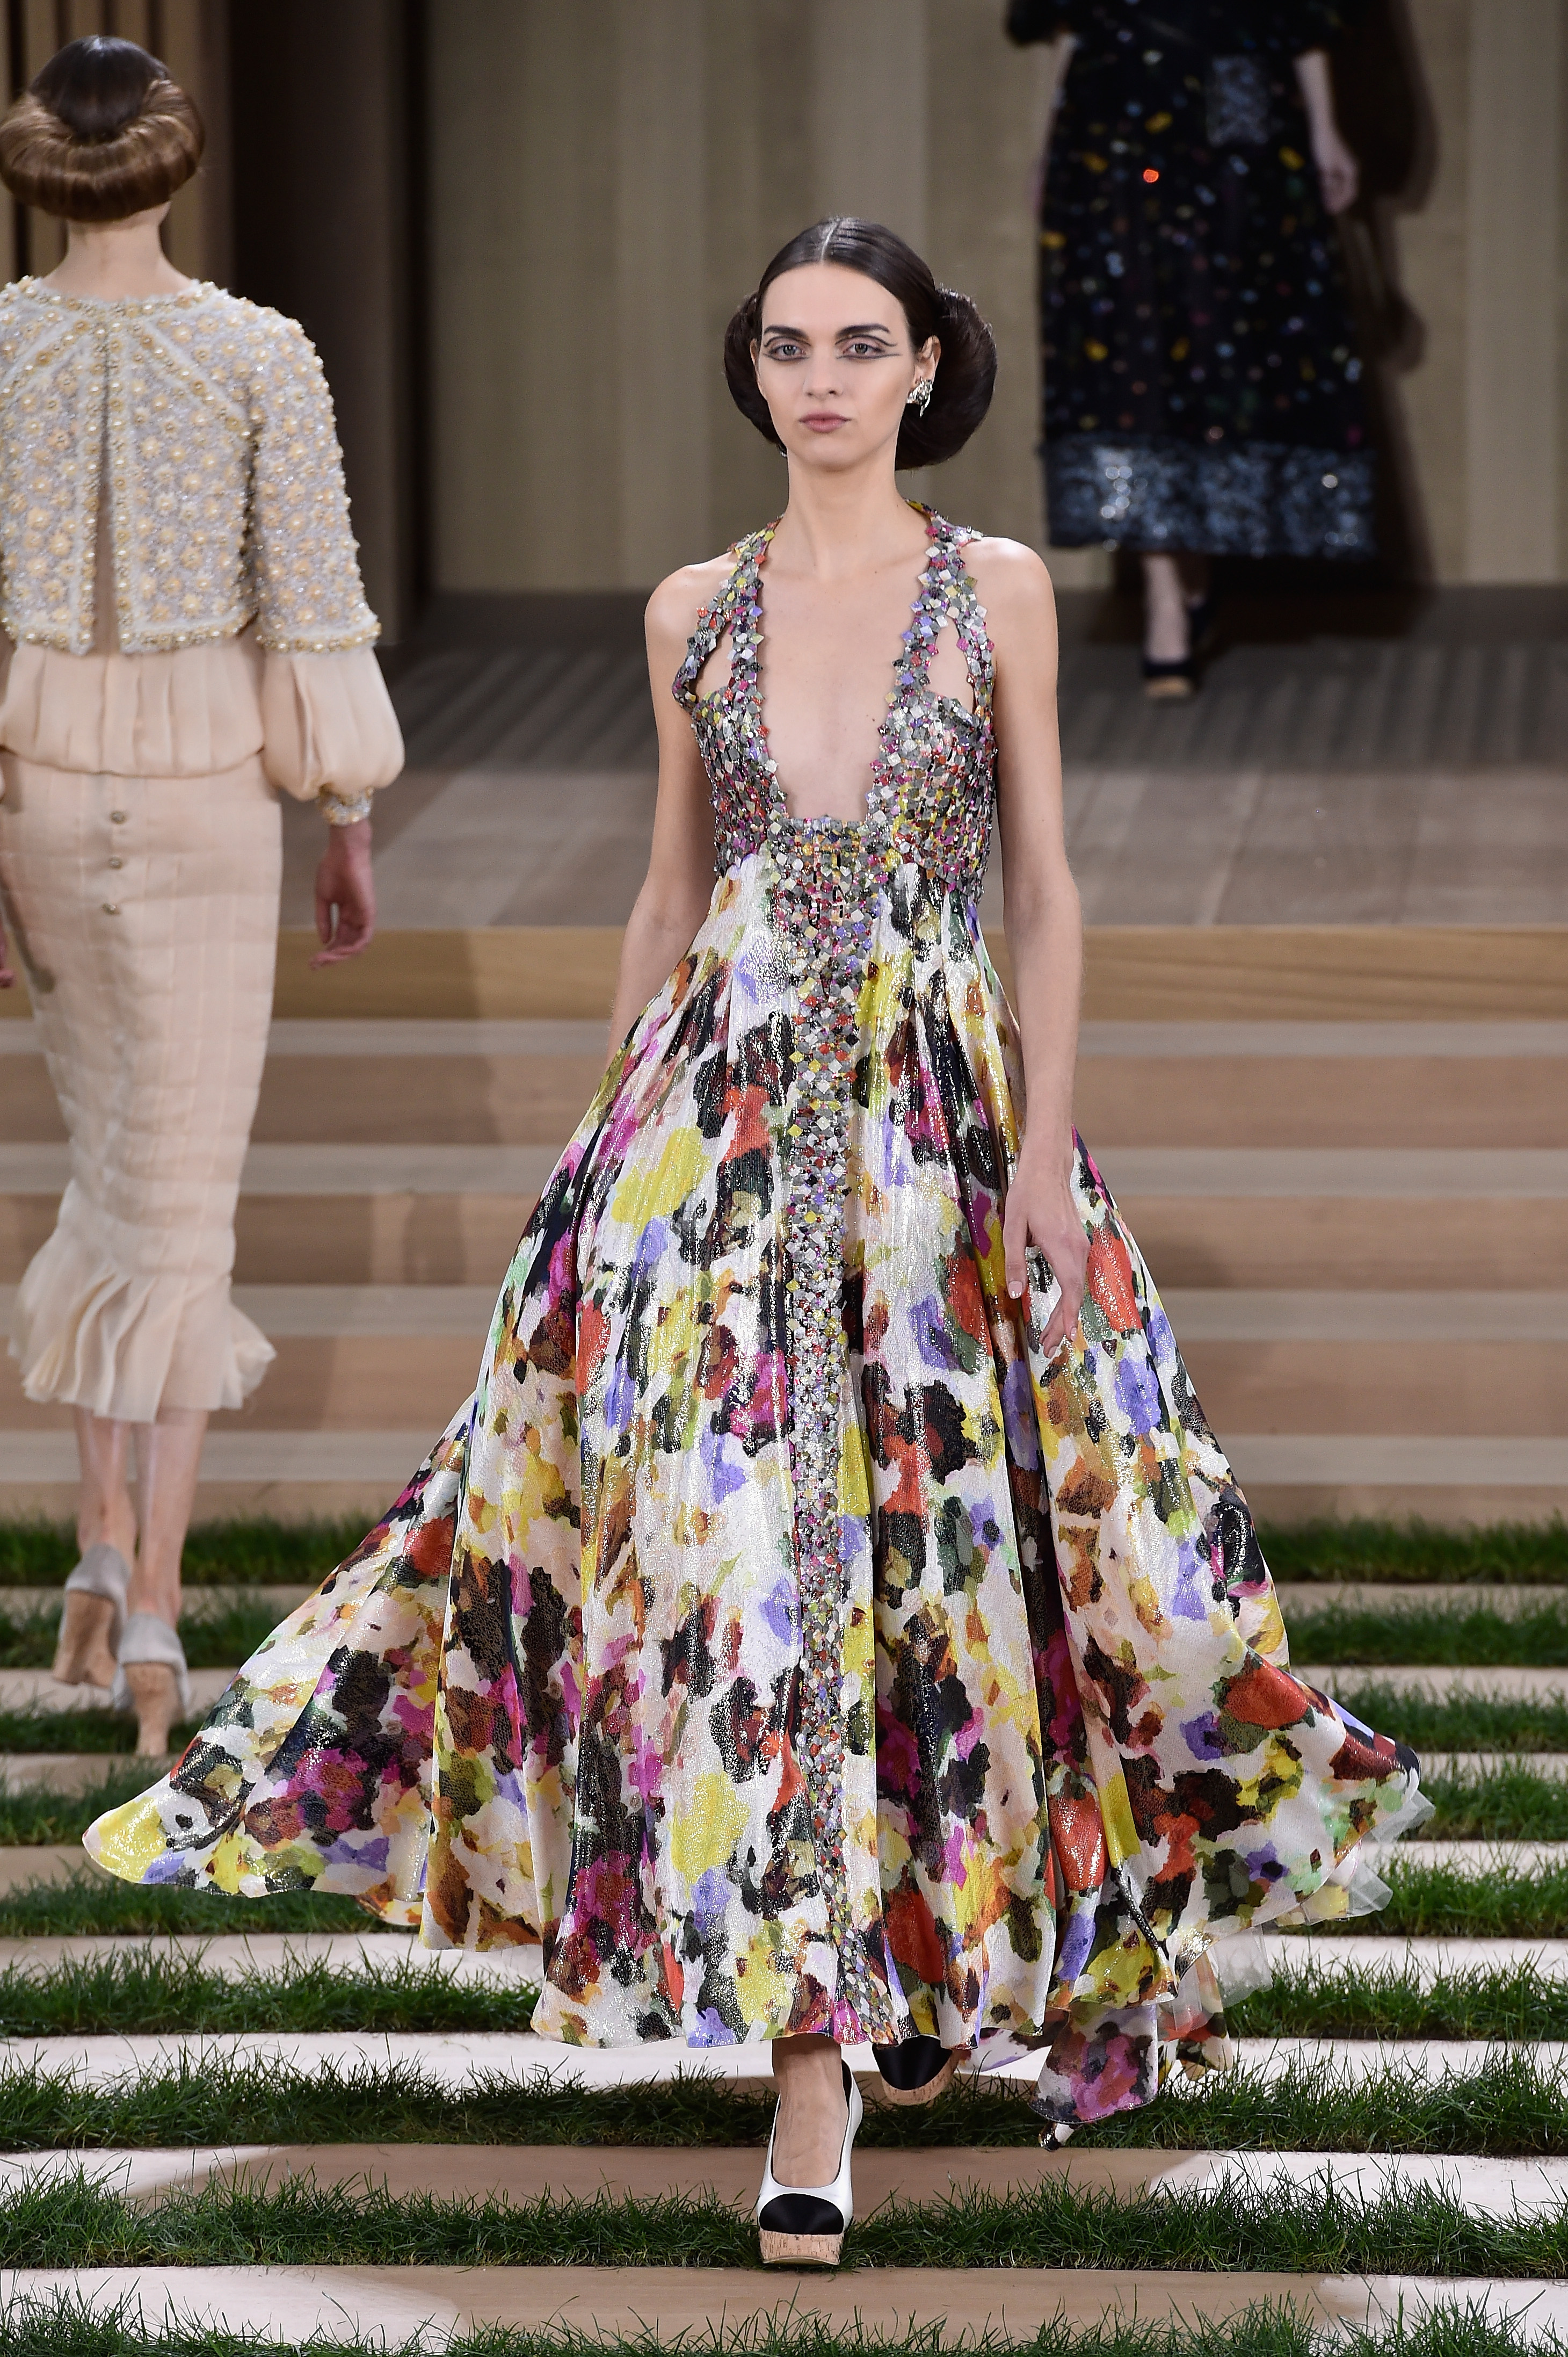 vision Skat Ministerium Haute Couture Week: Chanel Spring/Summer 2016 - Go Fug Yourself